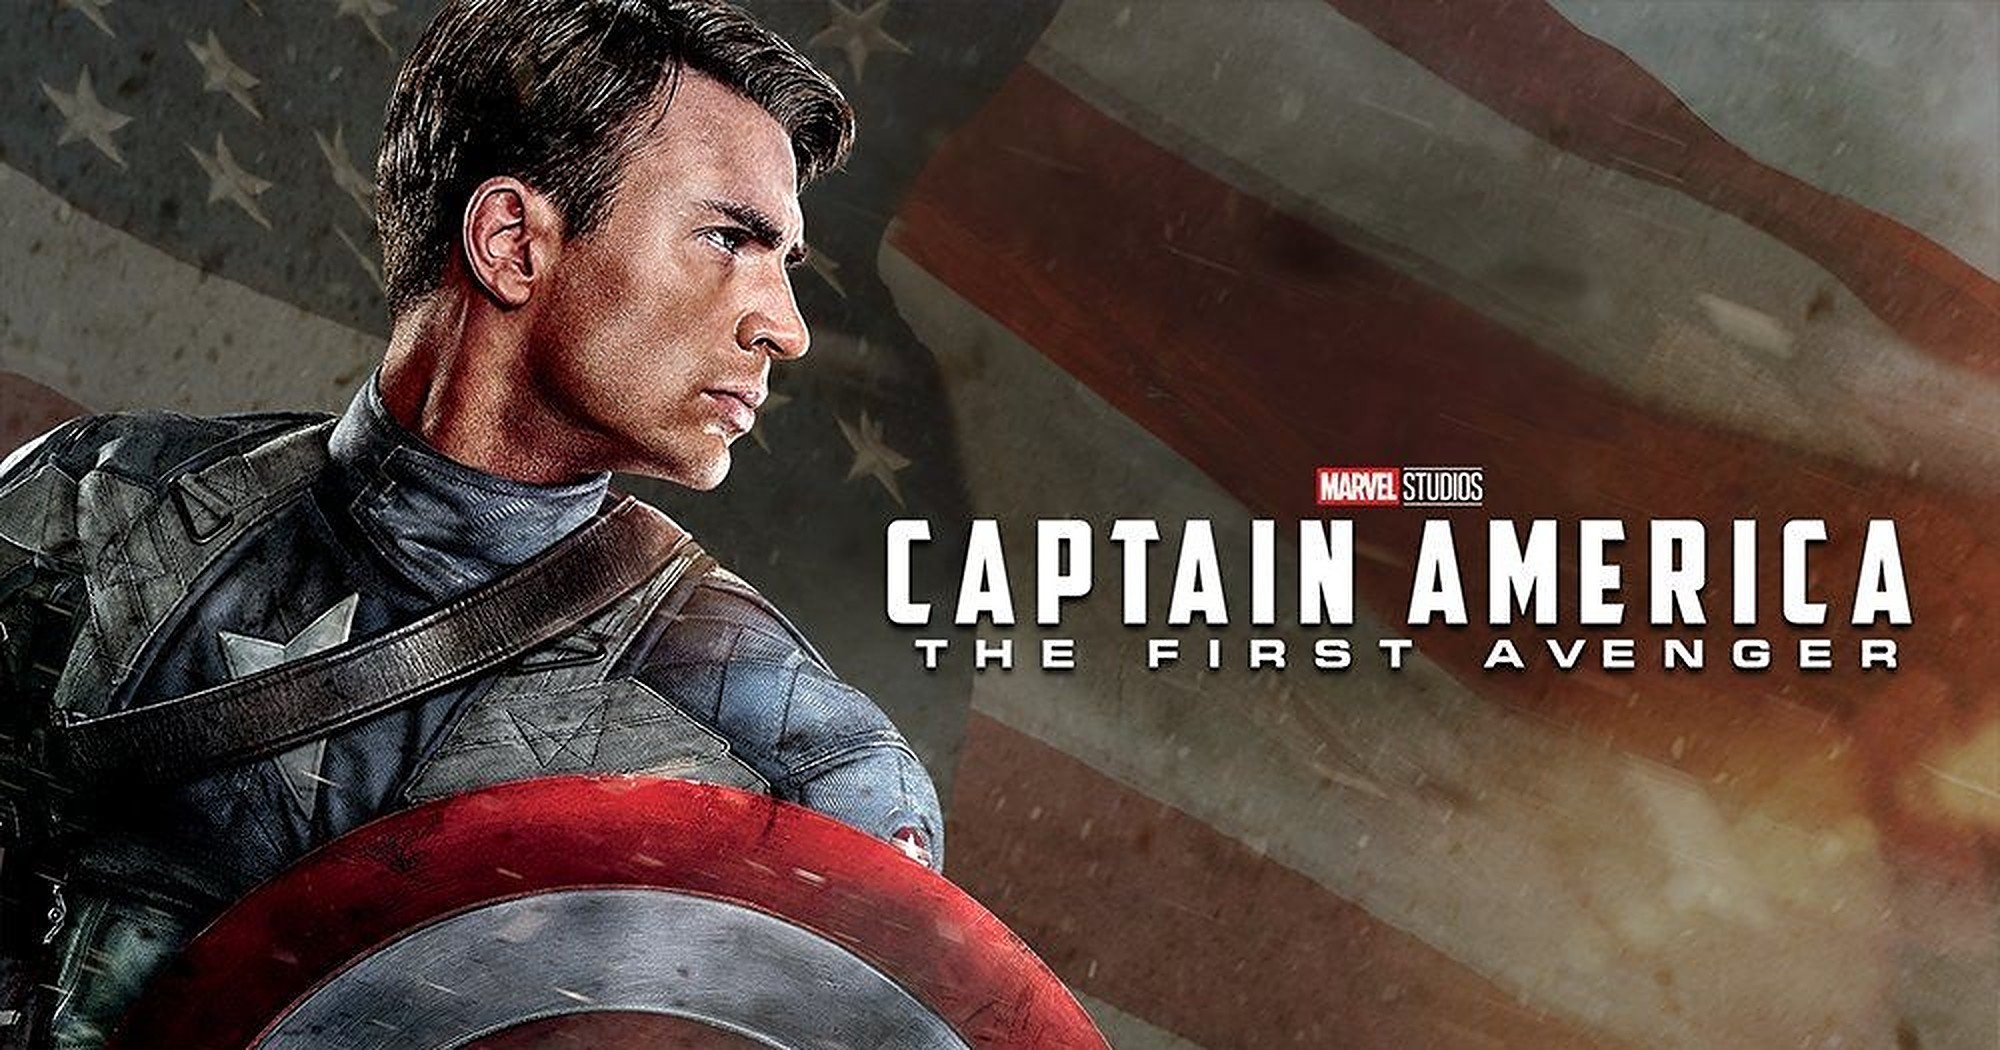 31-facts-about-the-movie-captain-america-the-first-avenger